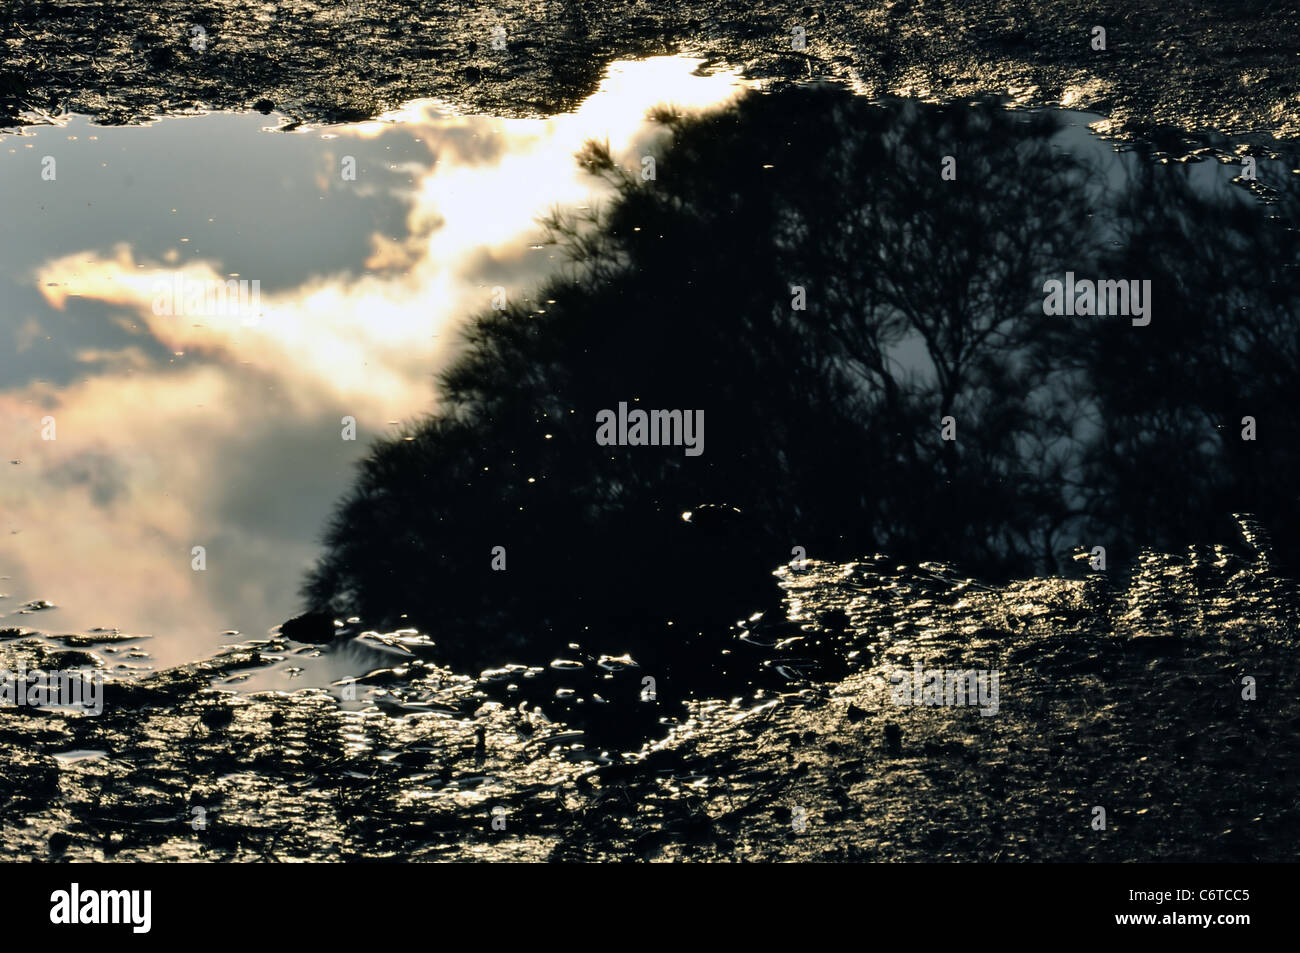 Trees and moody sky reflected in muddy water. Stock Photo